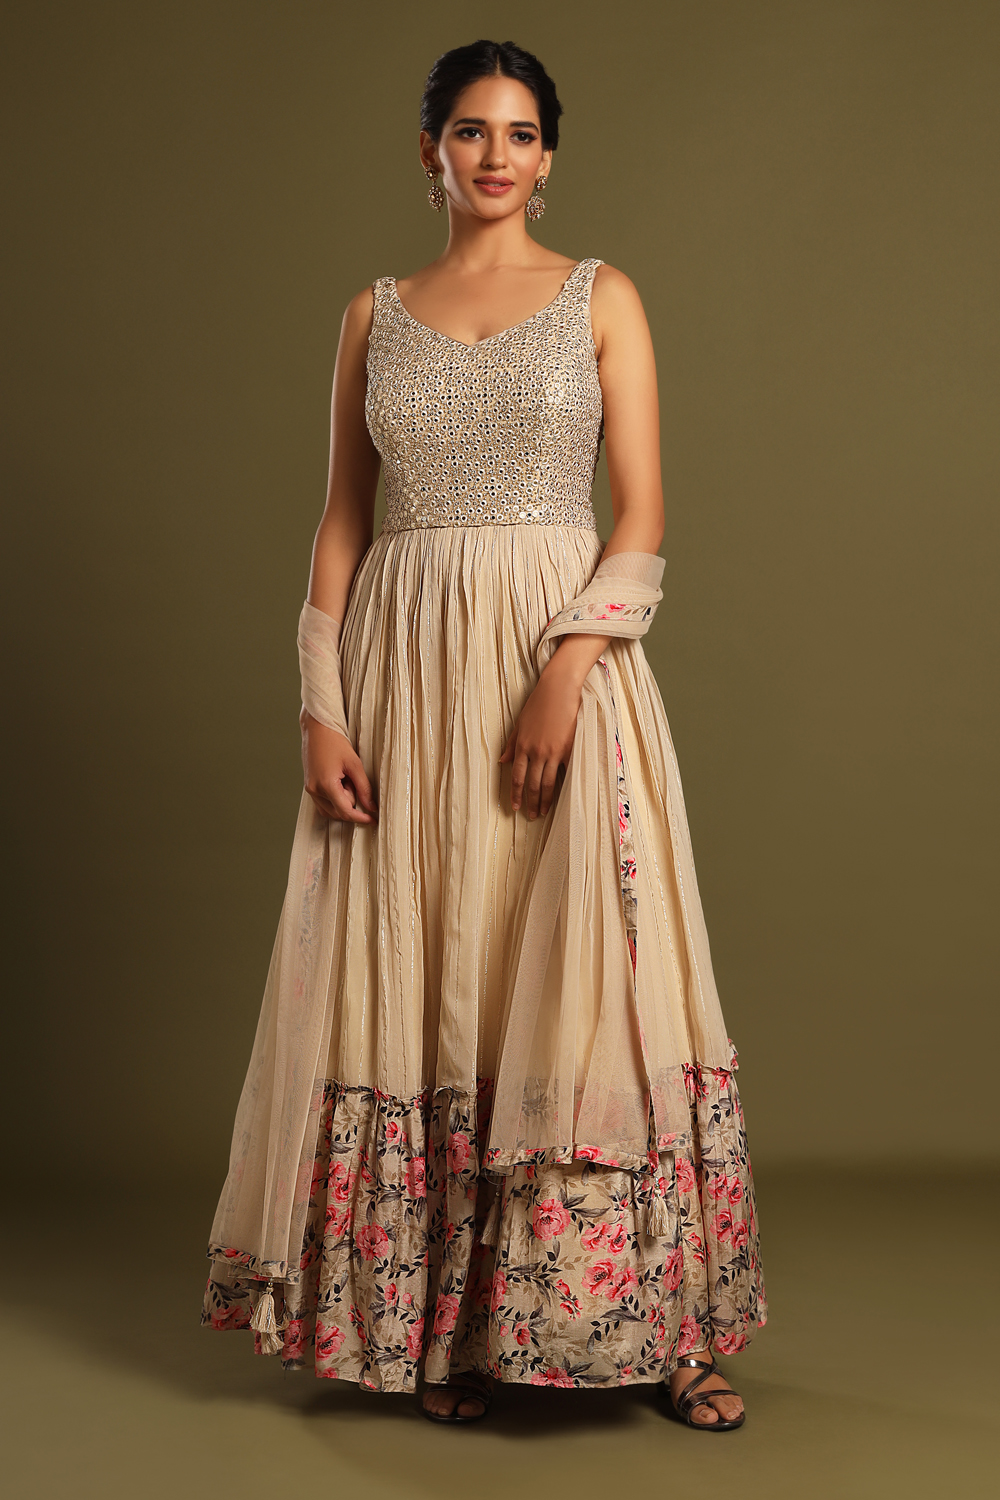 Buy Frock Style Anarkali Suits Online | Andaazfashion.com